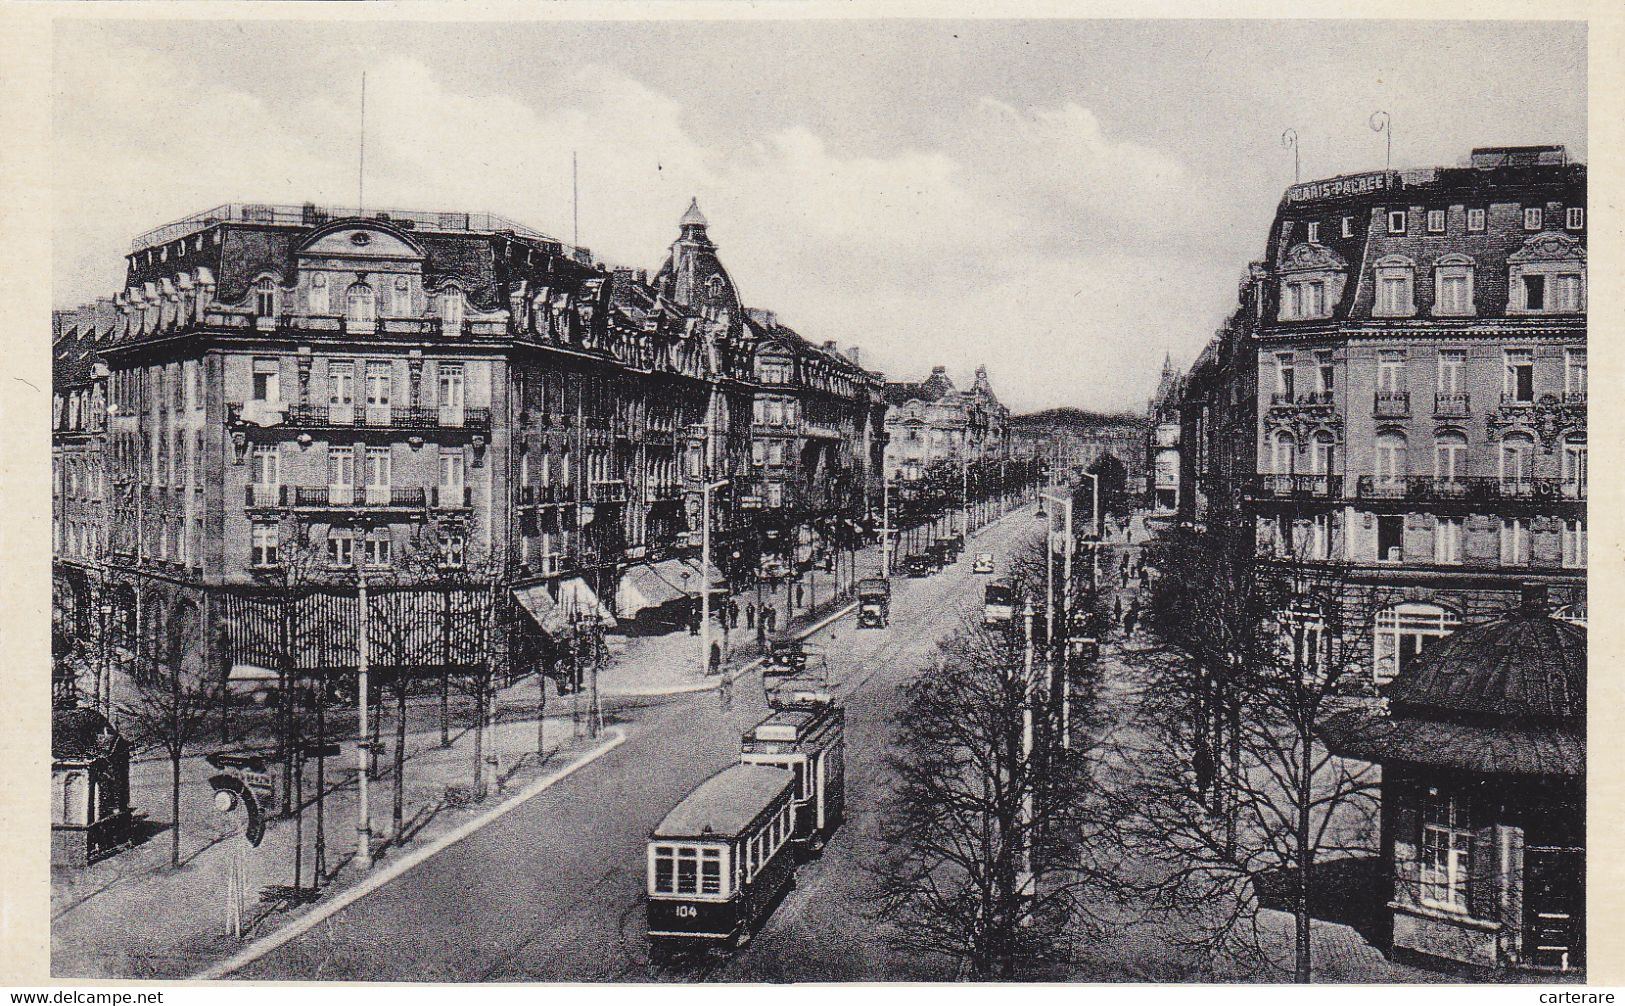 LUXEMBOURG,CARTE POSTALE ANCIENNE - Luxembourg - Ville